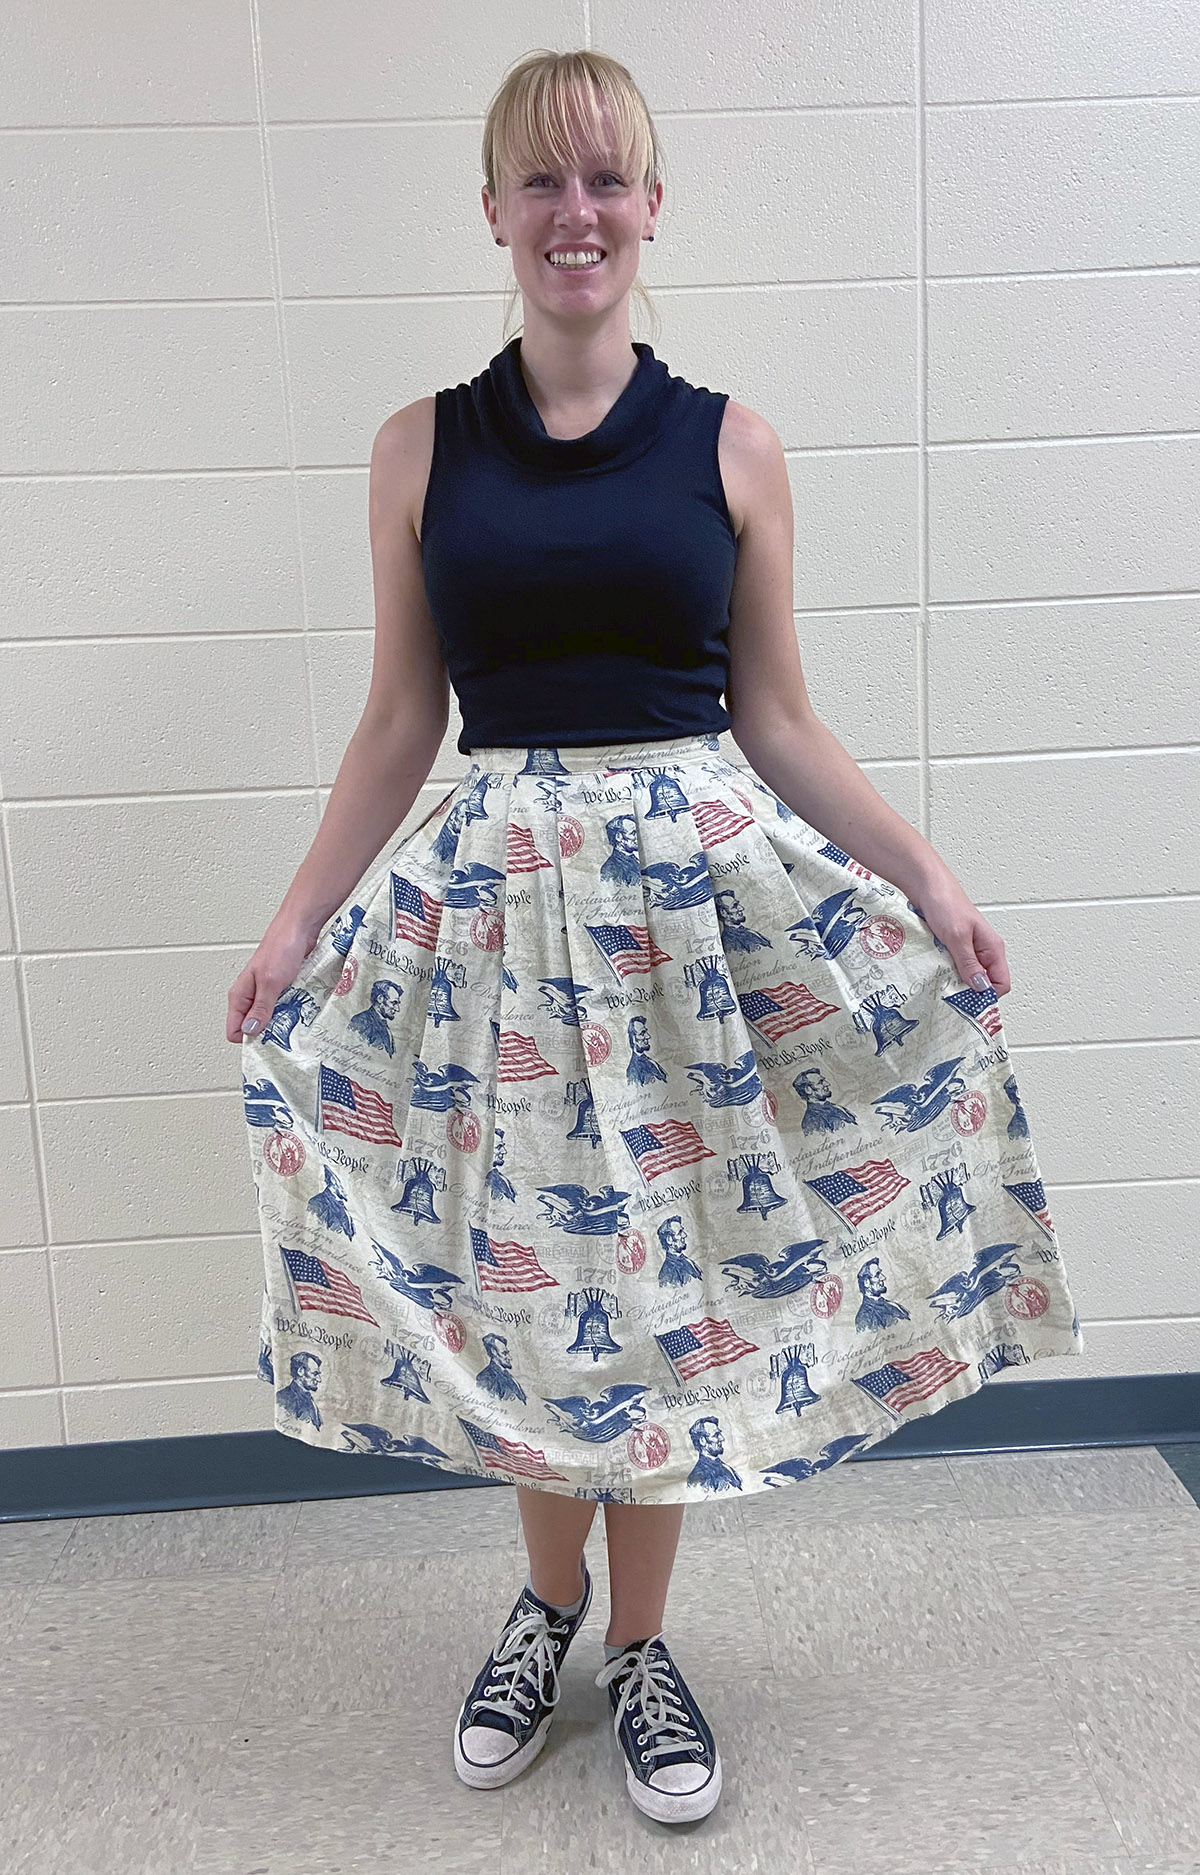 Lodi High School teacher Kelsie Barlow smiles at the camera and shows her pleated skirt made of fabric with U.S. flags, Abraham Lincoln, the Liberty Bell, an eagle, and the words We the People